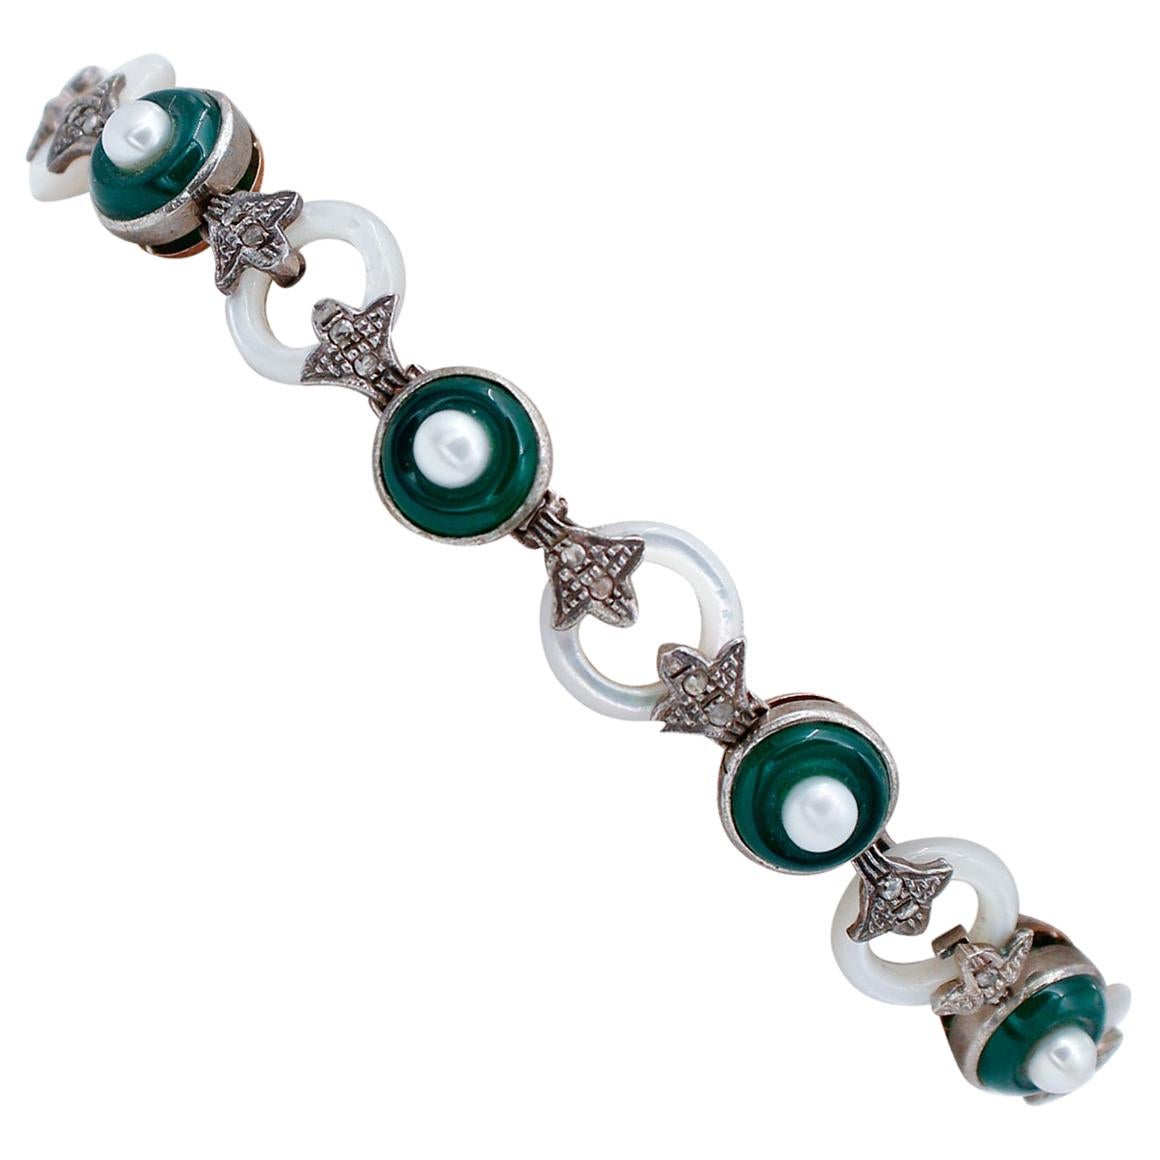 Diamonds, Green Agate, Pearls, White Stones, 9kt Rose Gold and Silver Bracelet